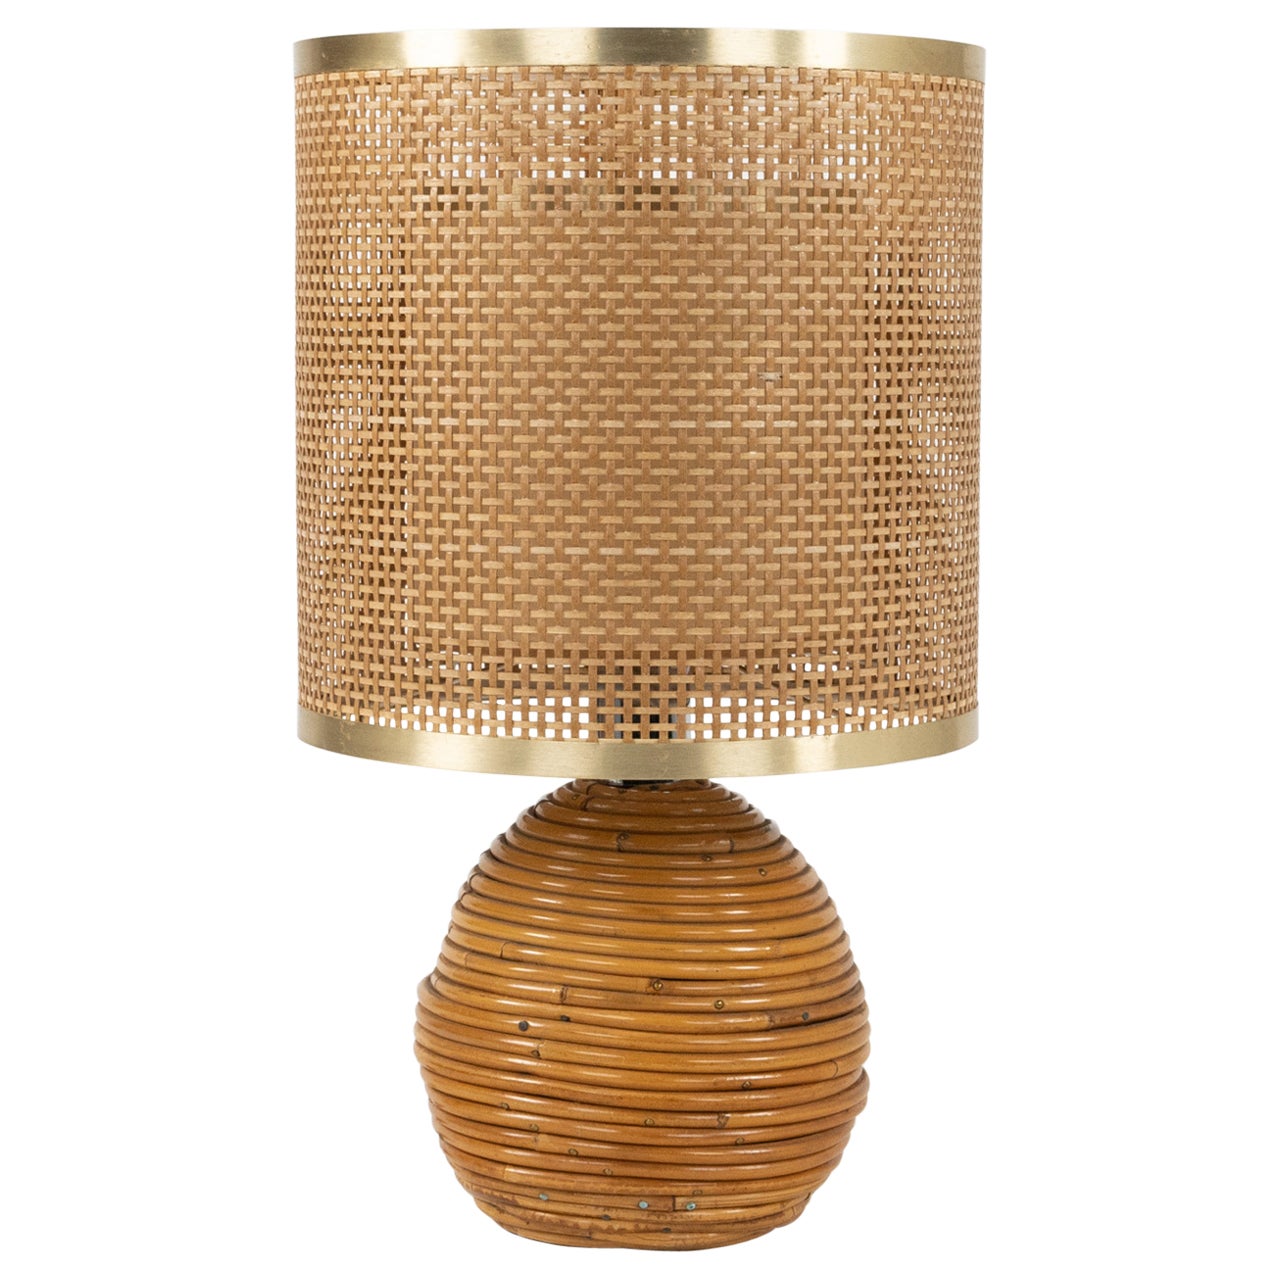 Midcentury Rattan, Wicker and Chrome Table Lamp by Vivai Del Sud, Italy 1970s